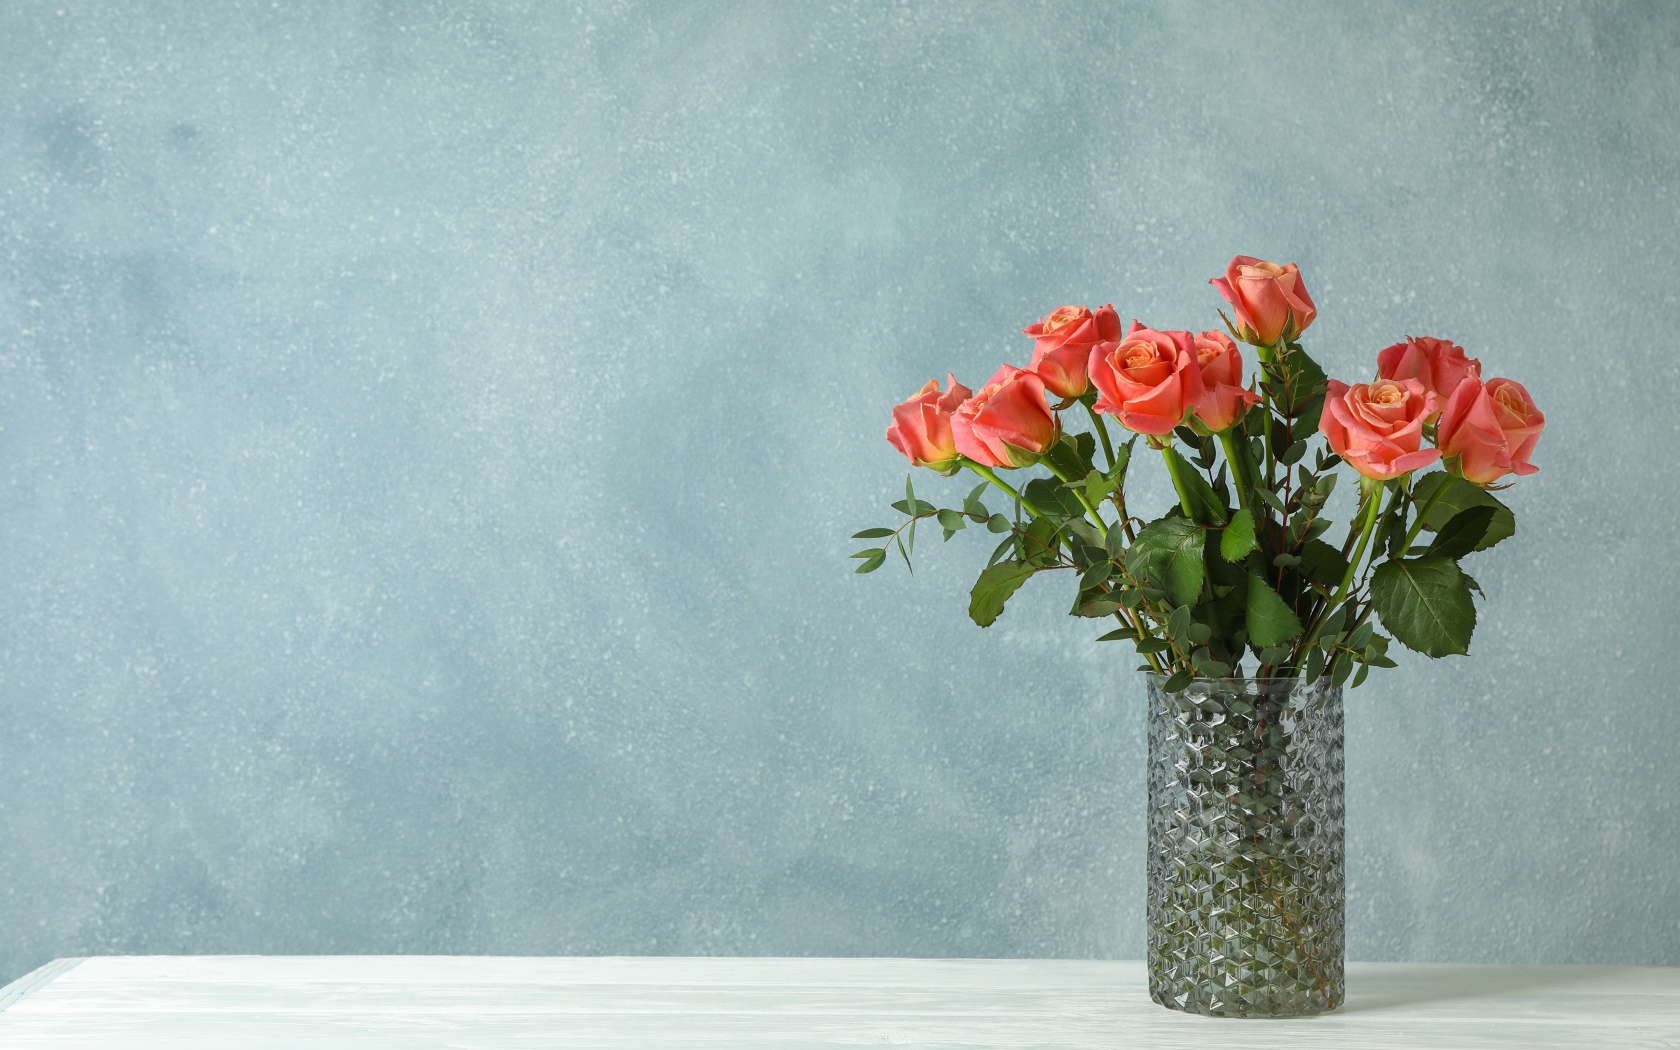 Bouquet of roses in a glass vase on a gray background